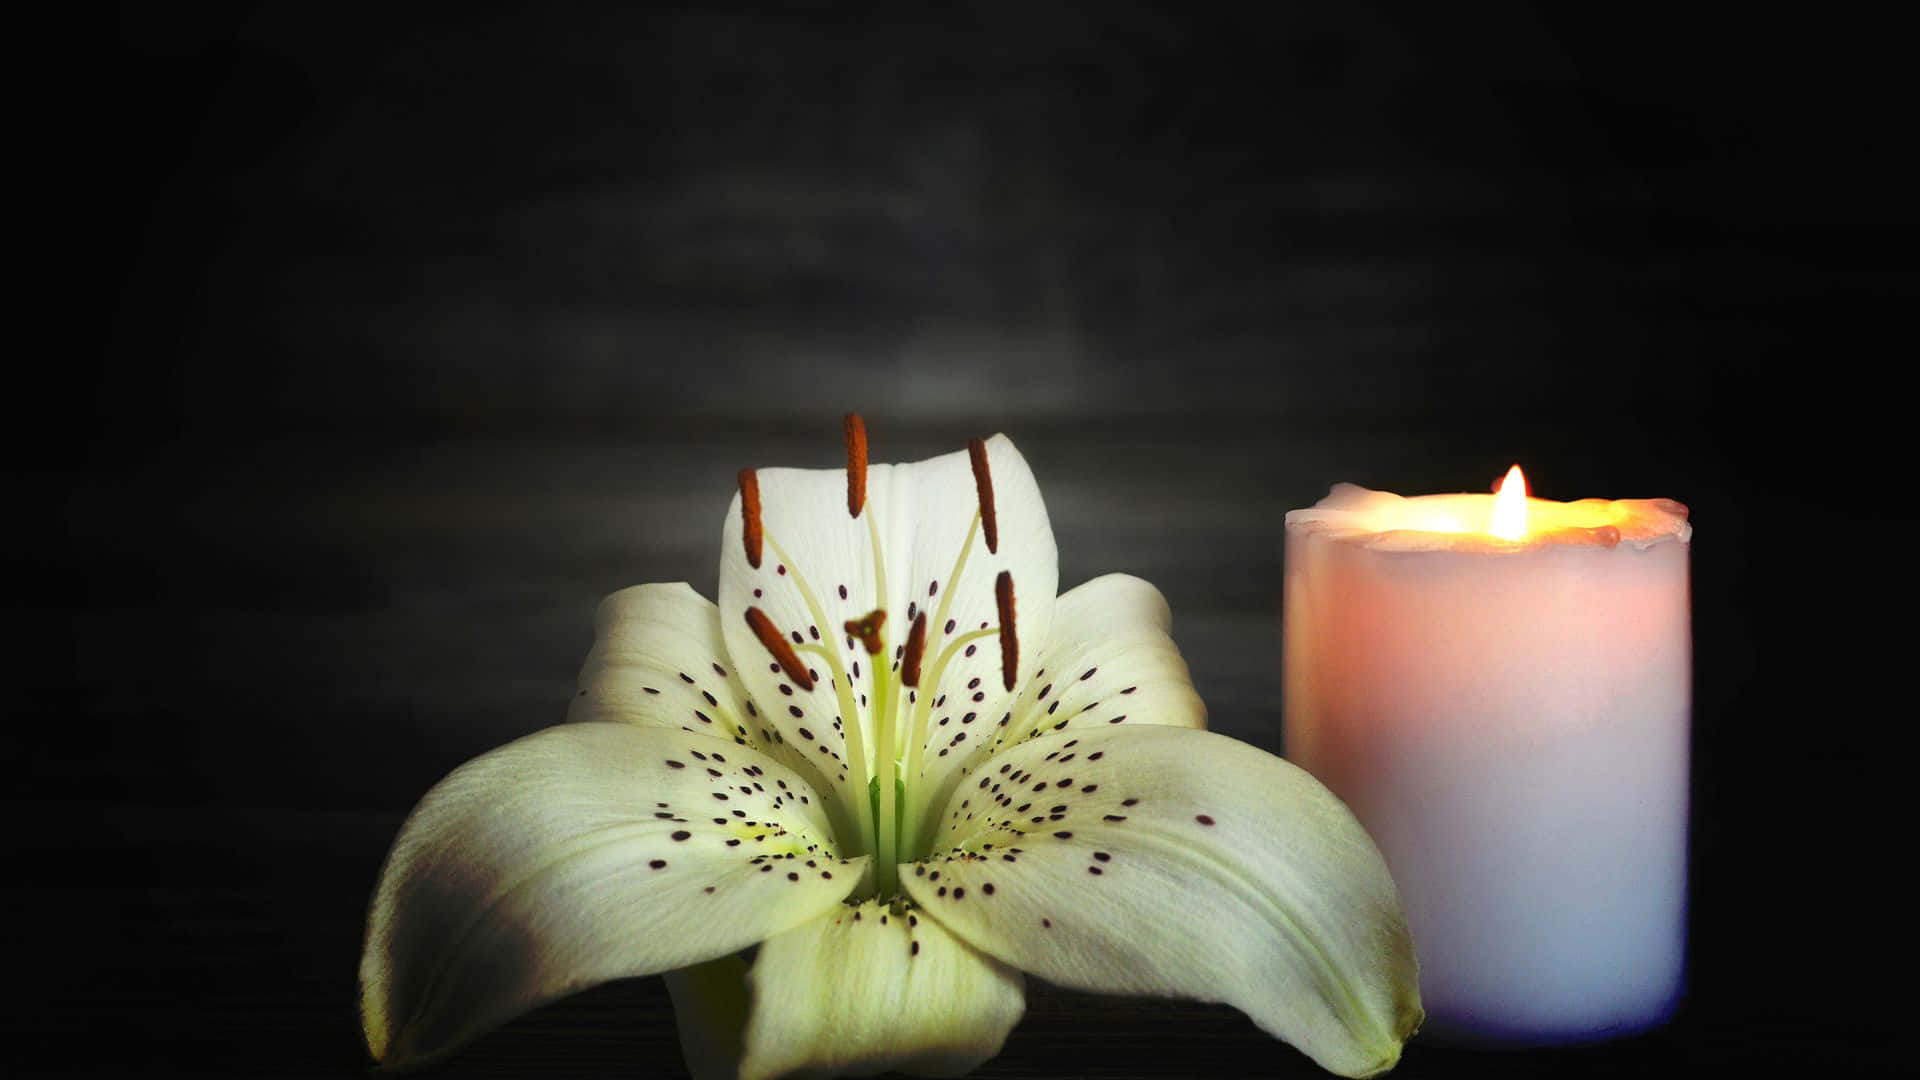 A White Lily And A Candle On A Dark Background